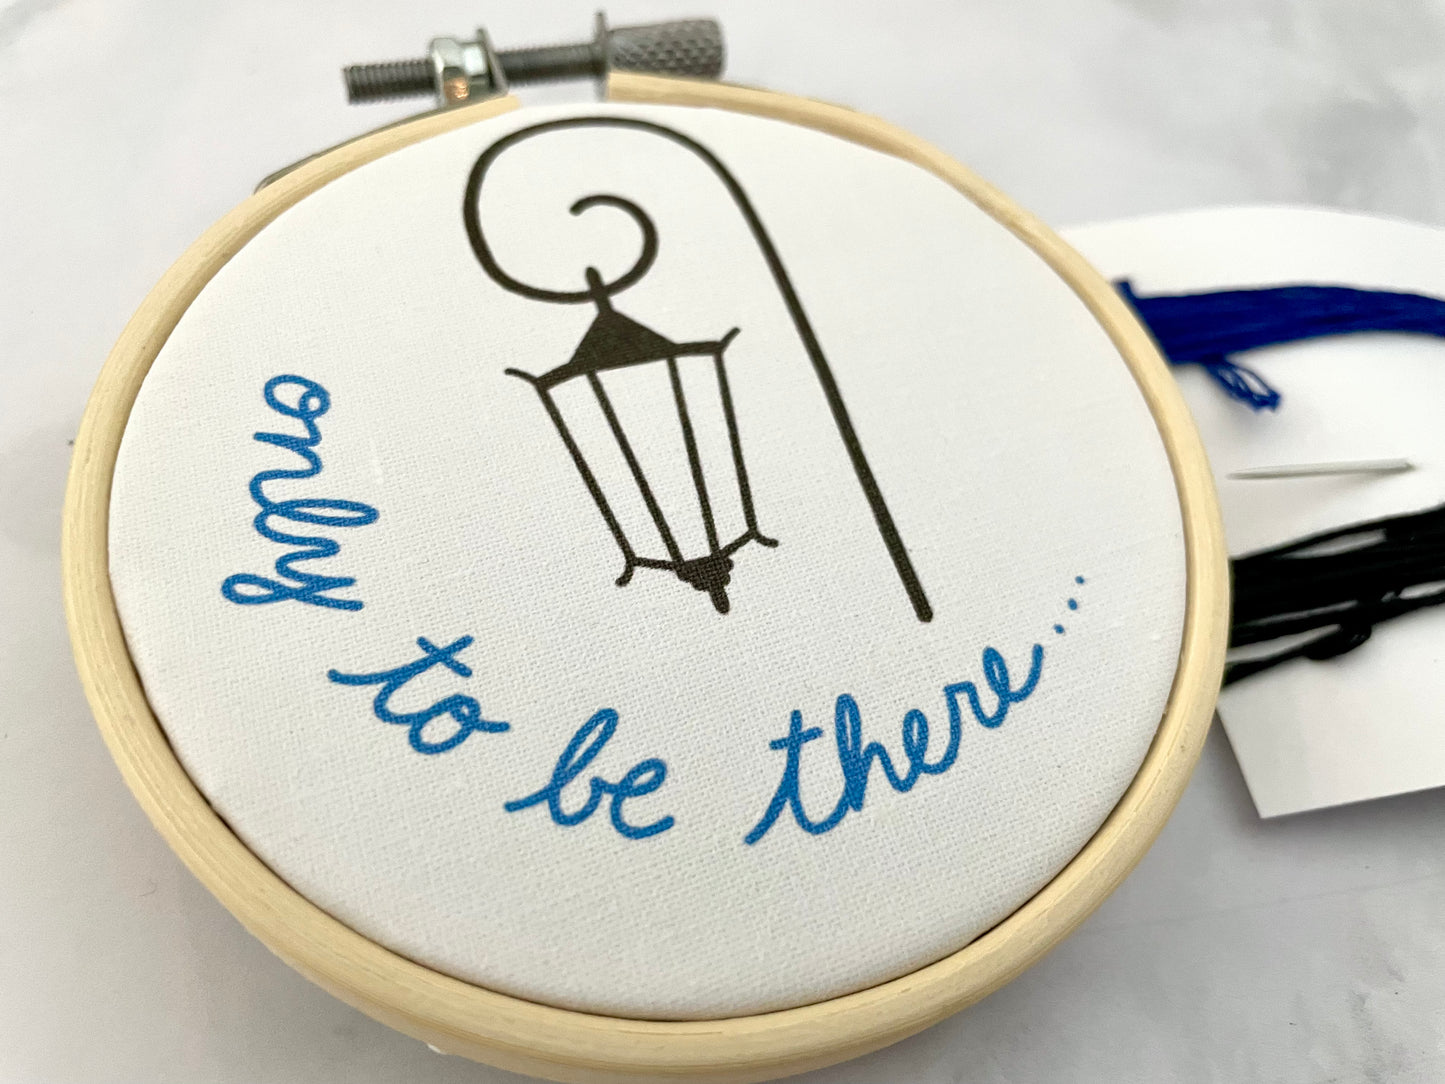 Wellesley College “Only To Be There” Embroidery Kit